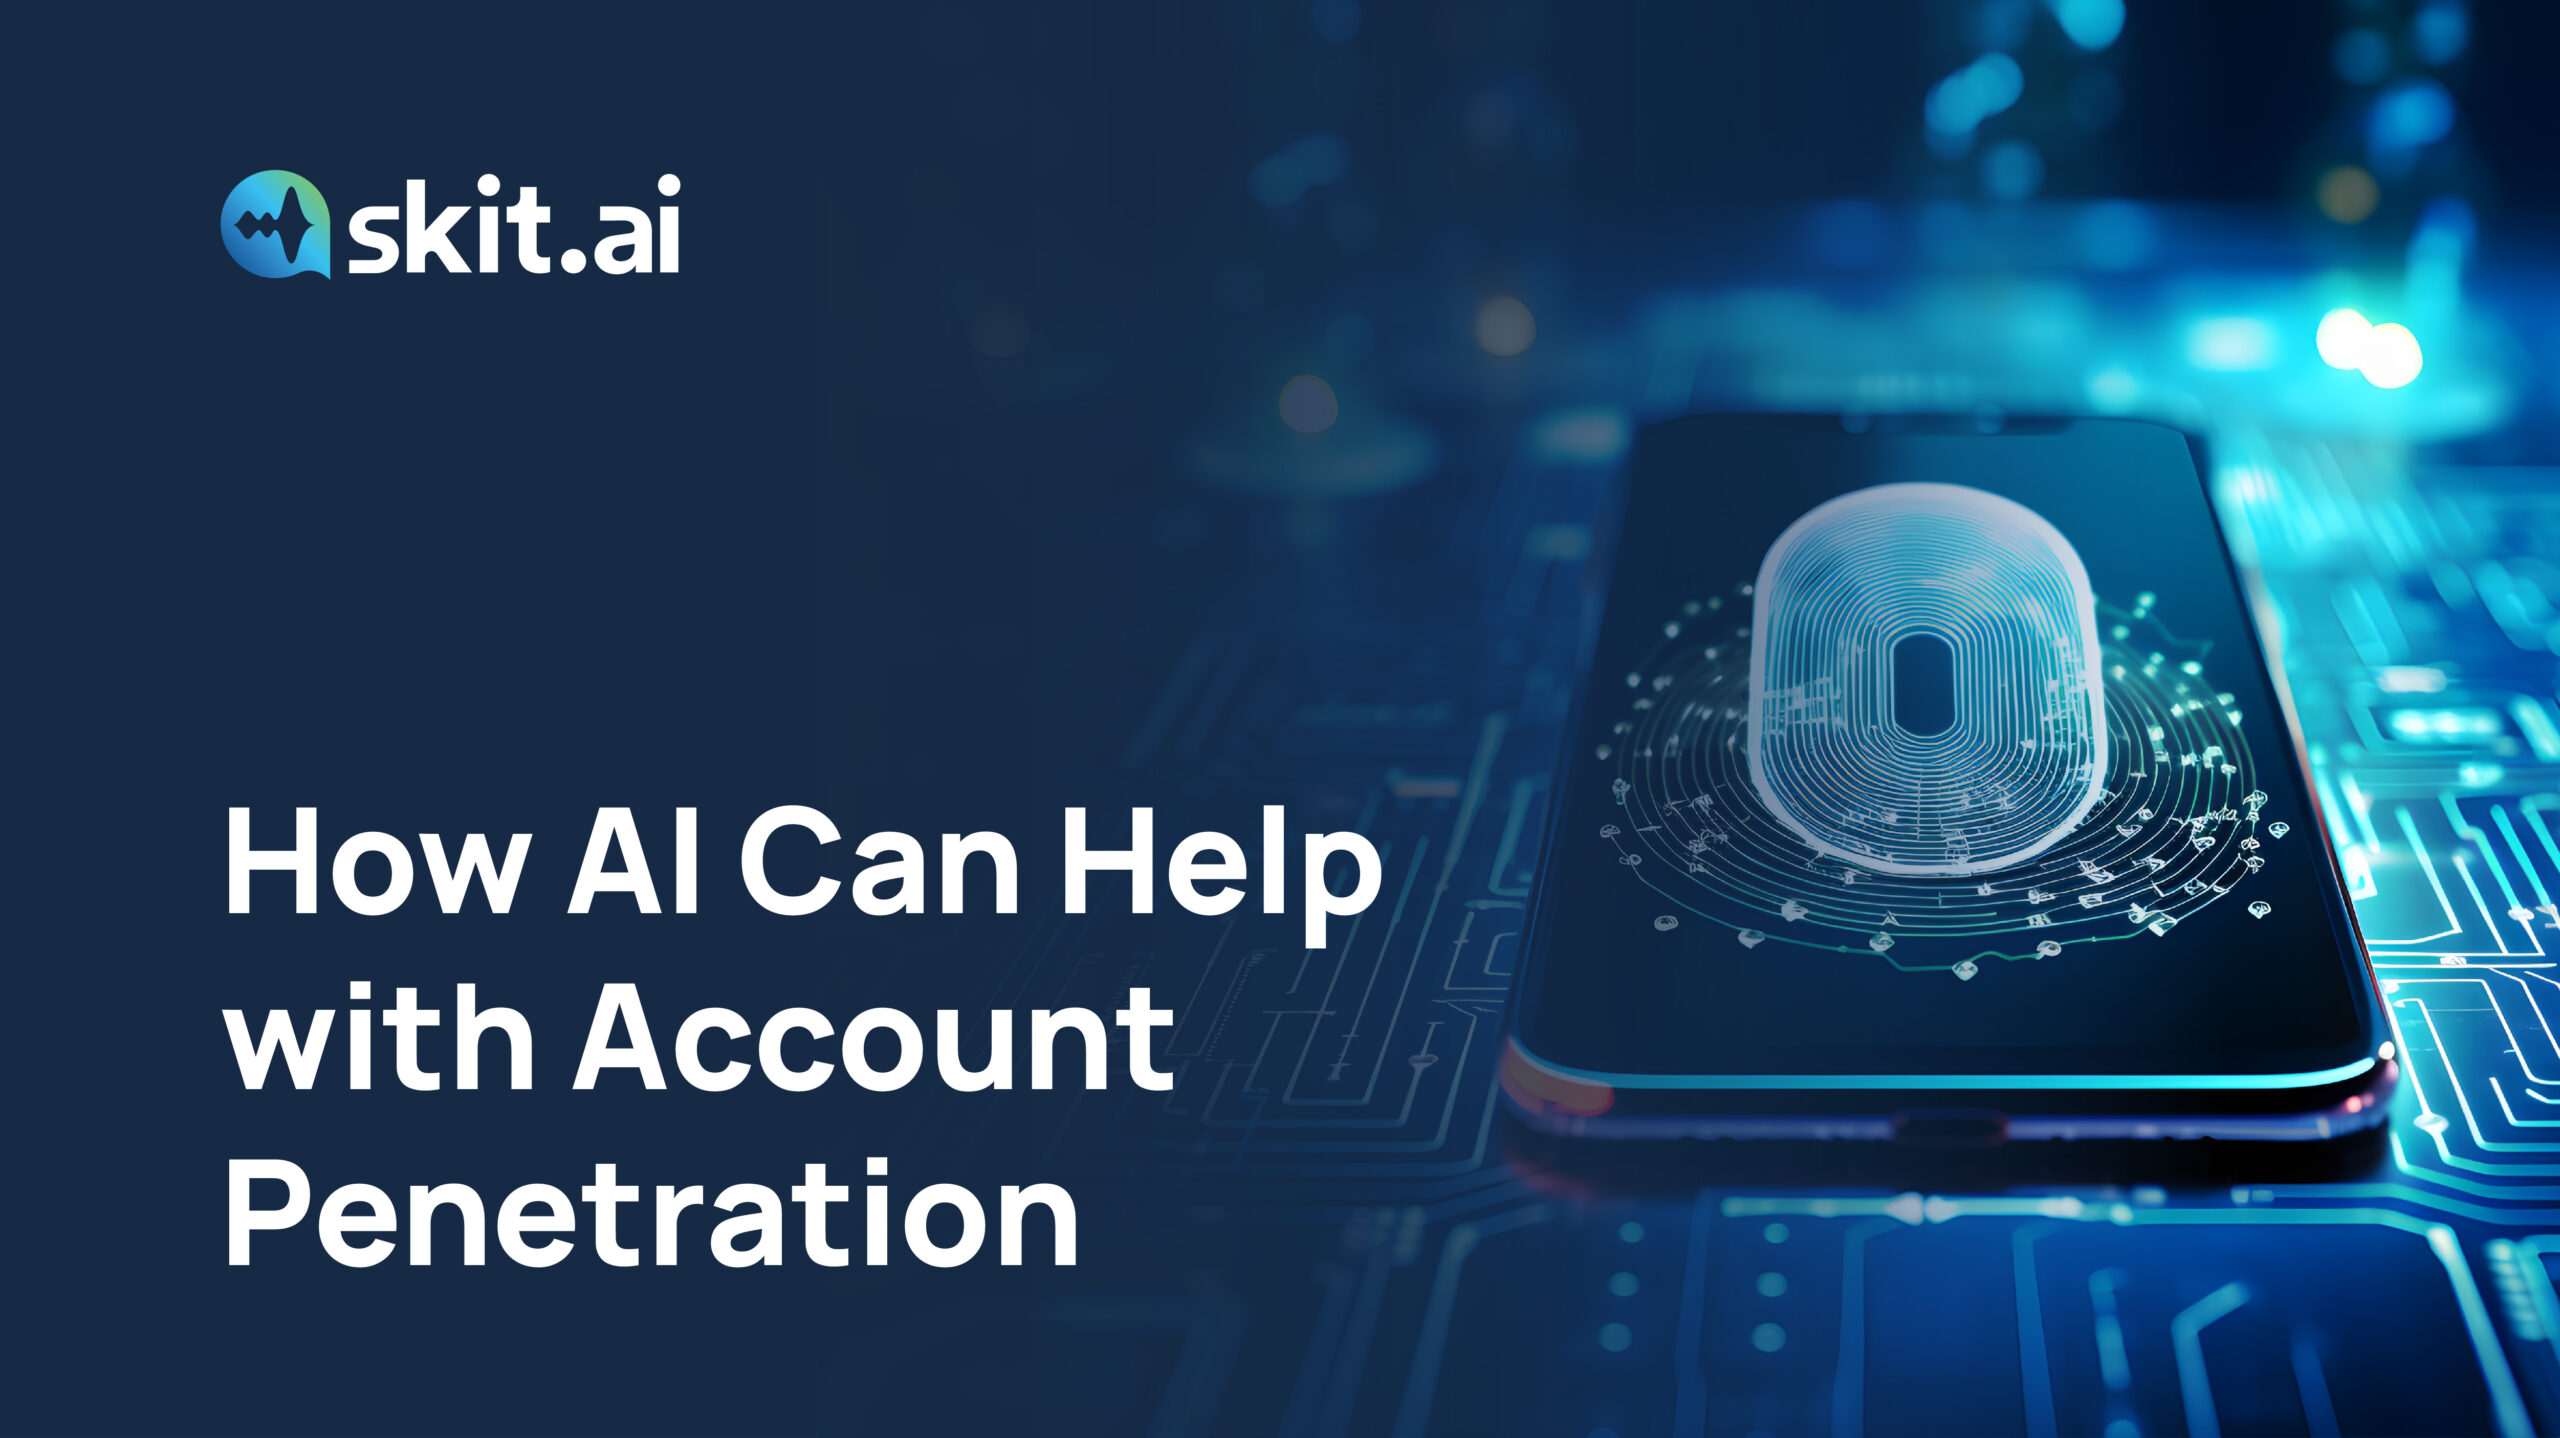 Faster and Efficient Account Penetration with Conversational AI